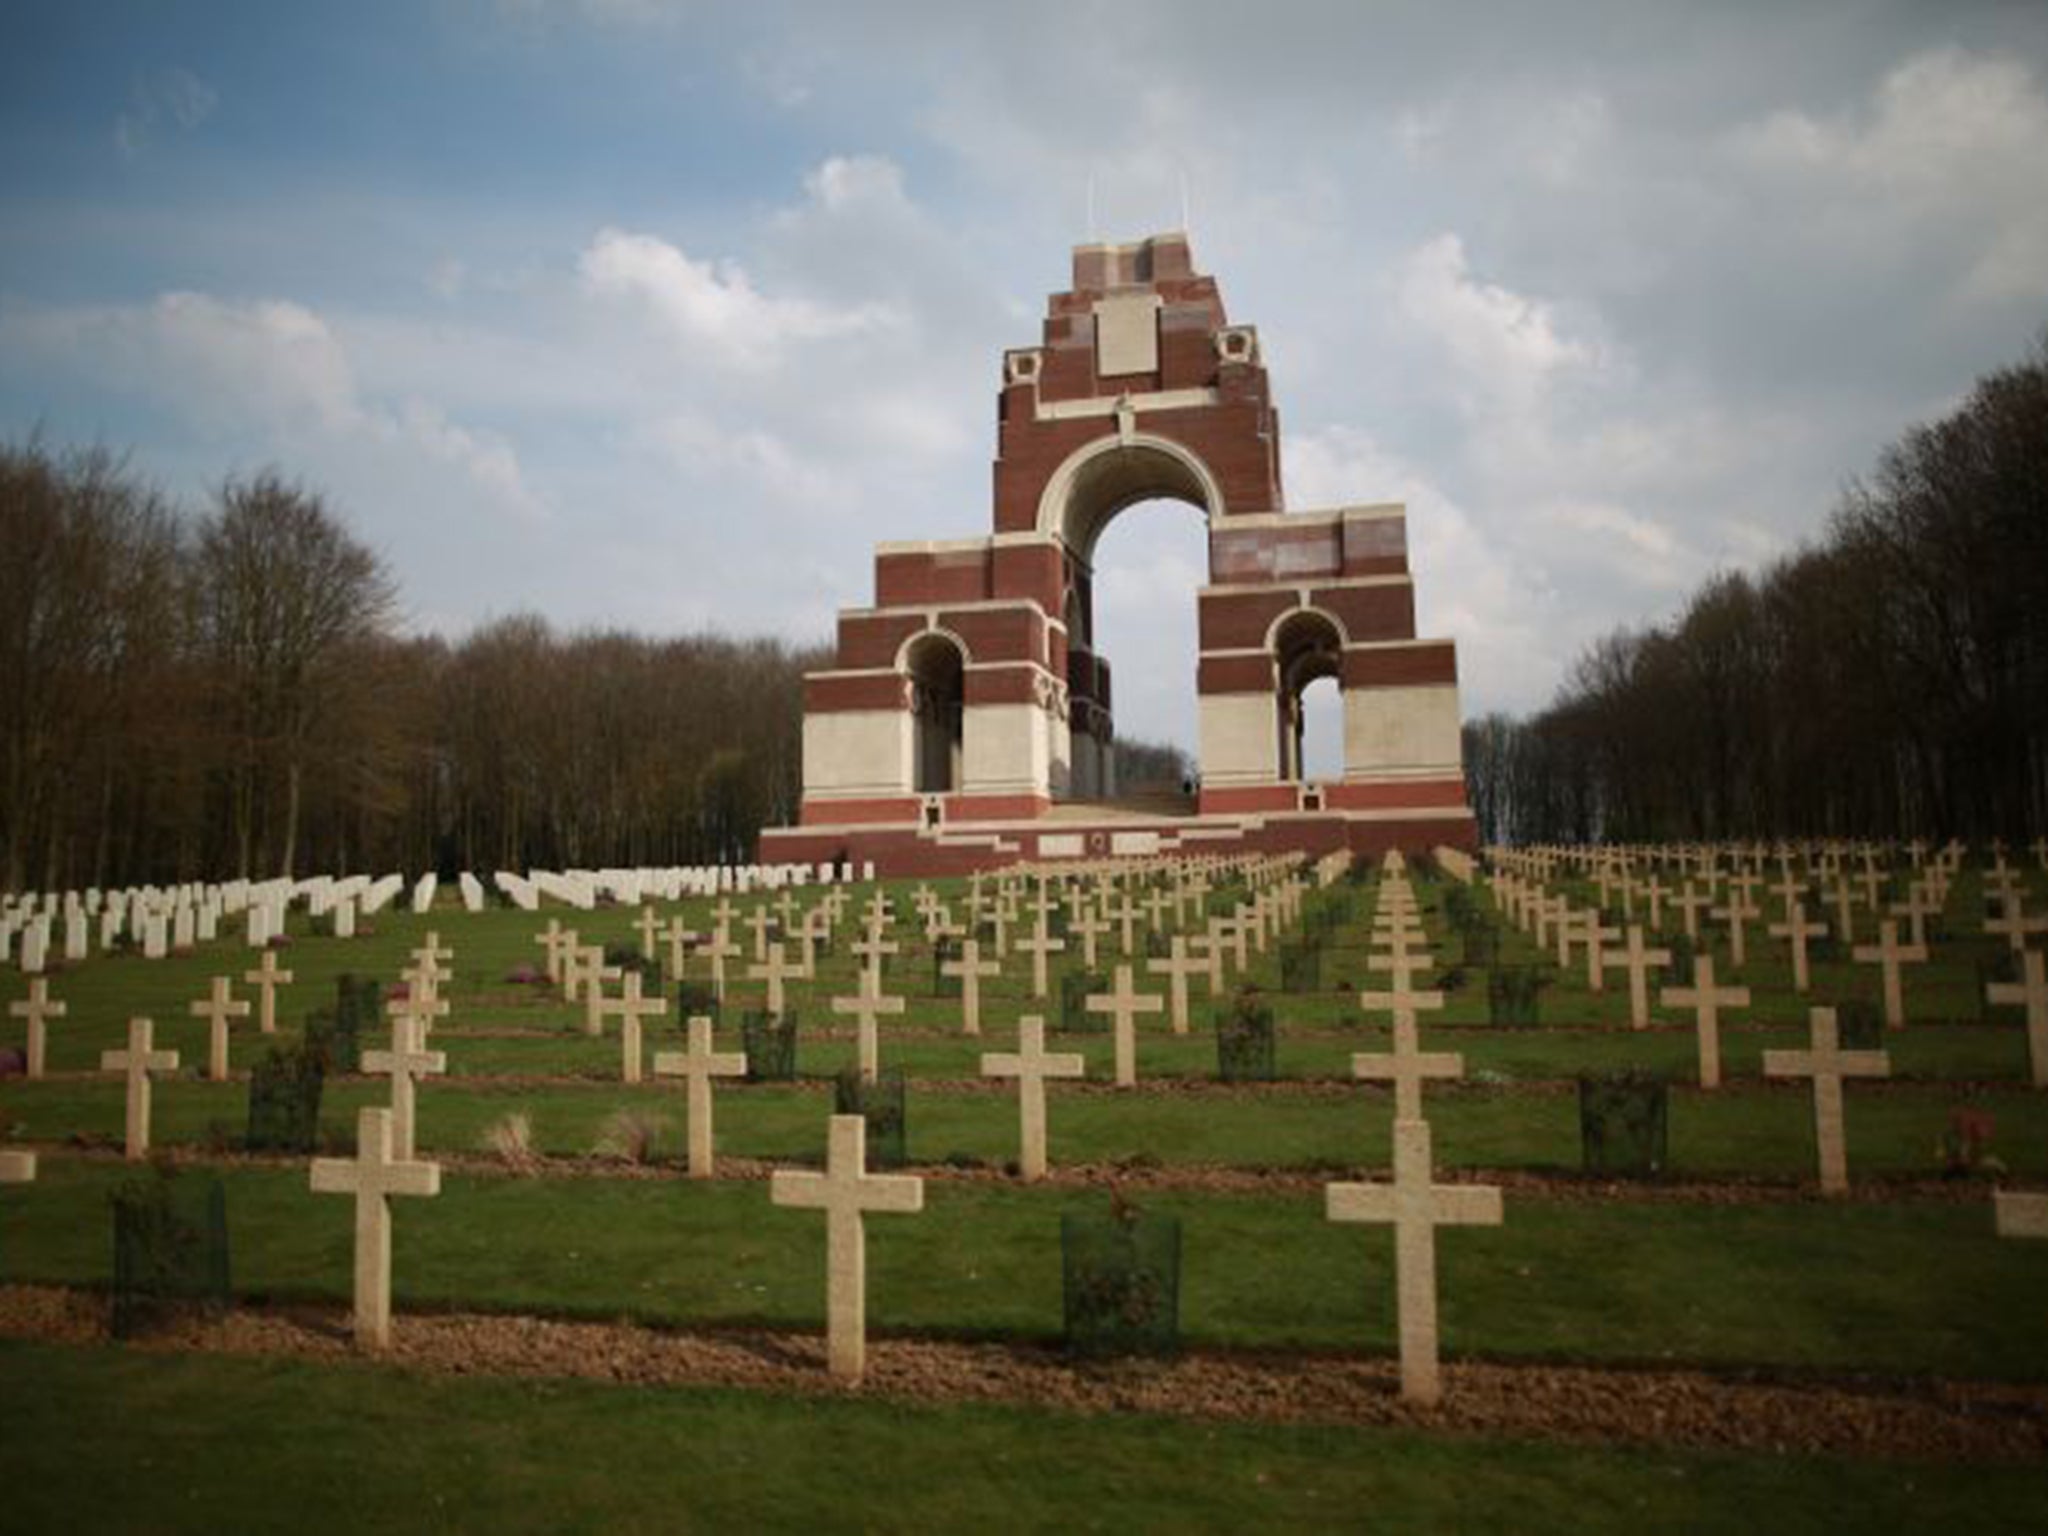 Next year’s event will be held at the Memorial to the Missing of the Somme in Thiepval, northern France